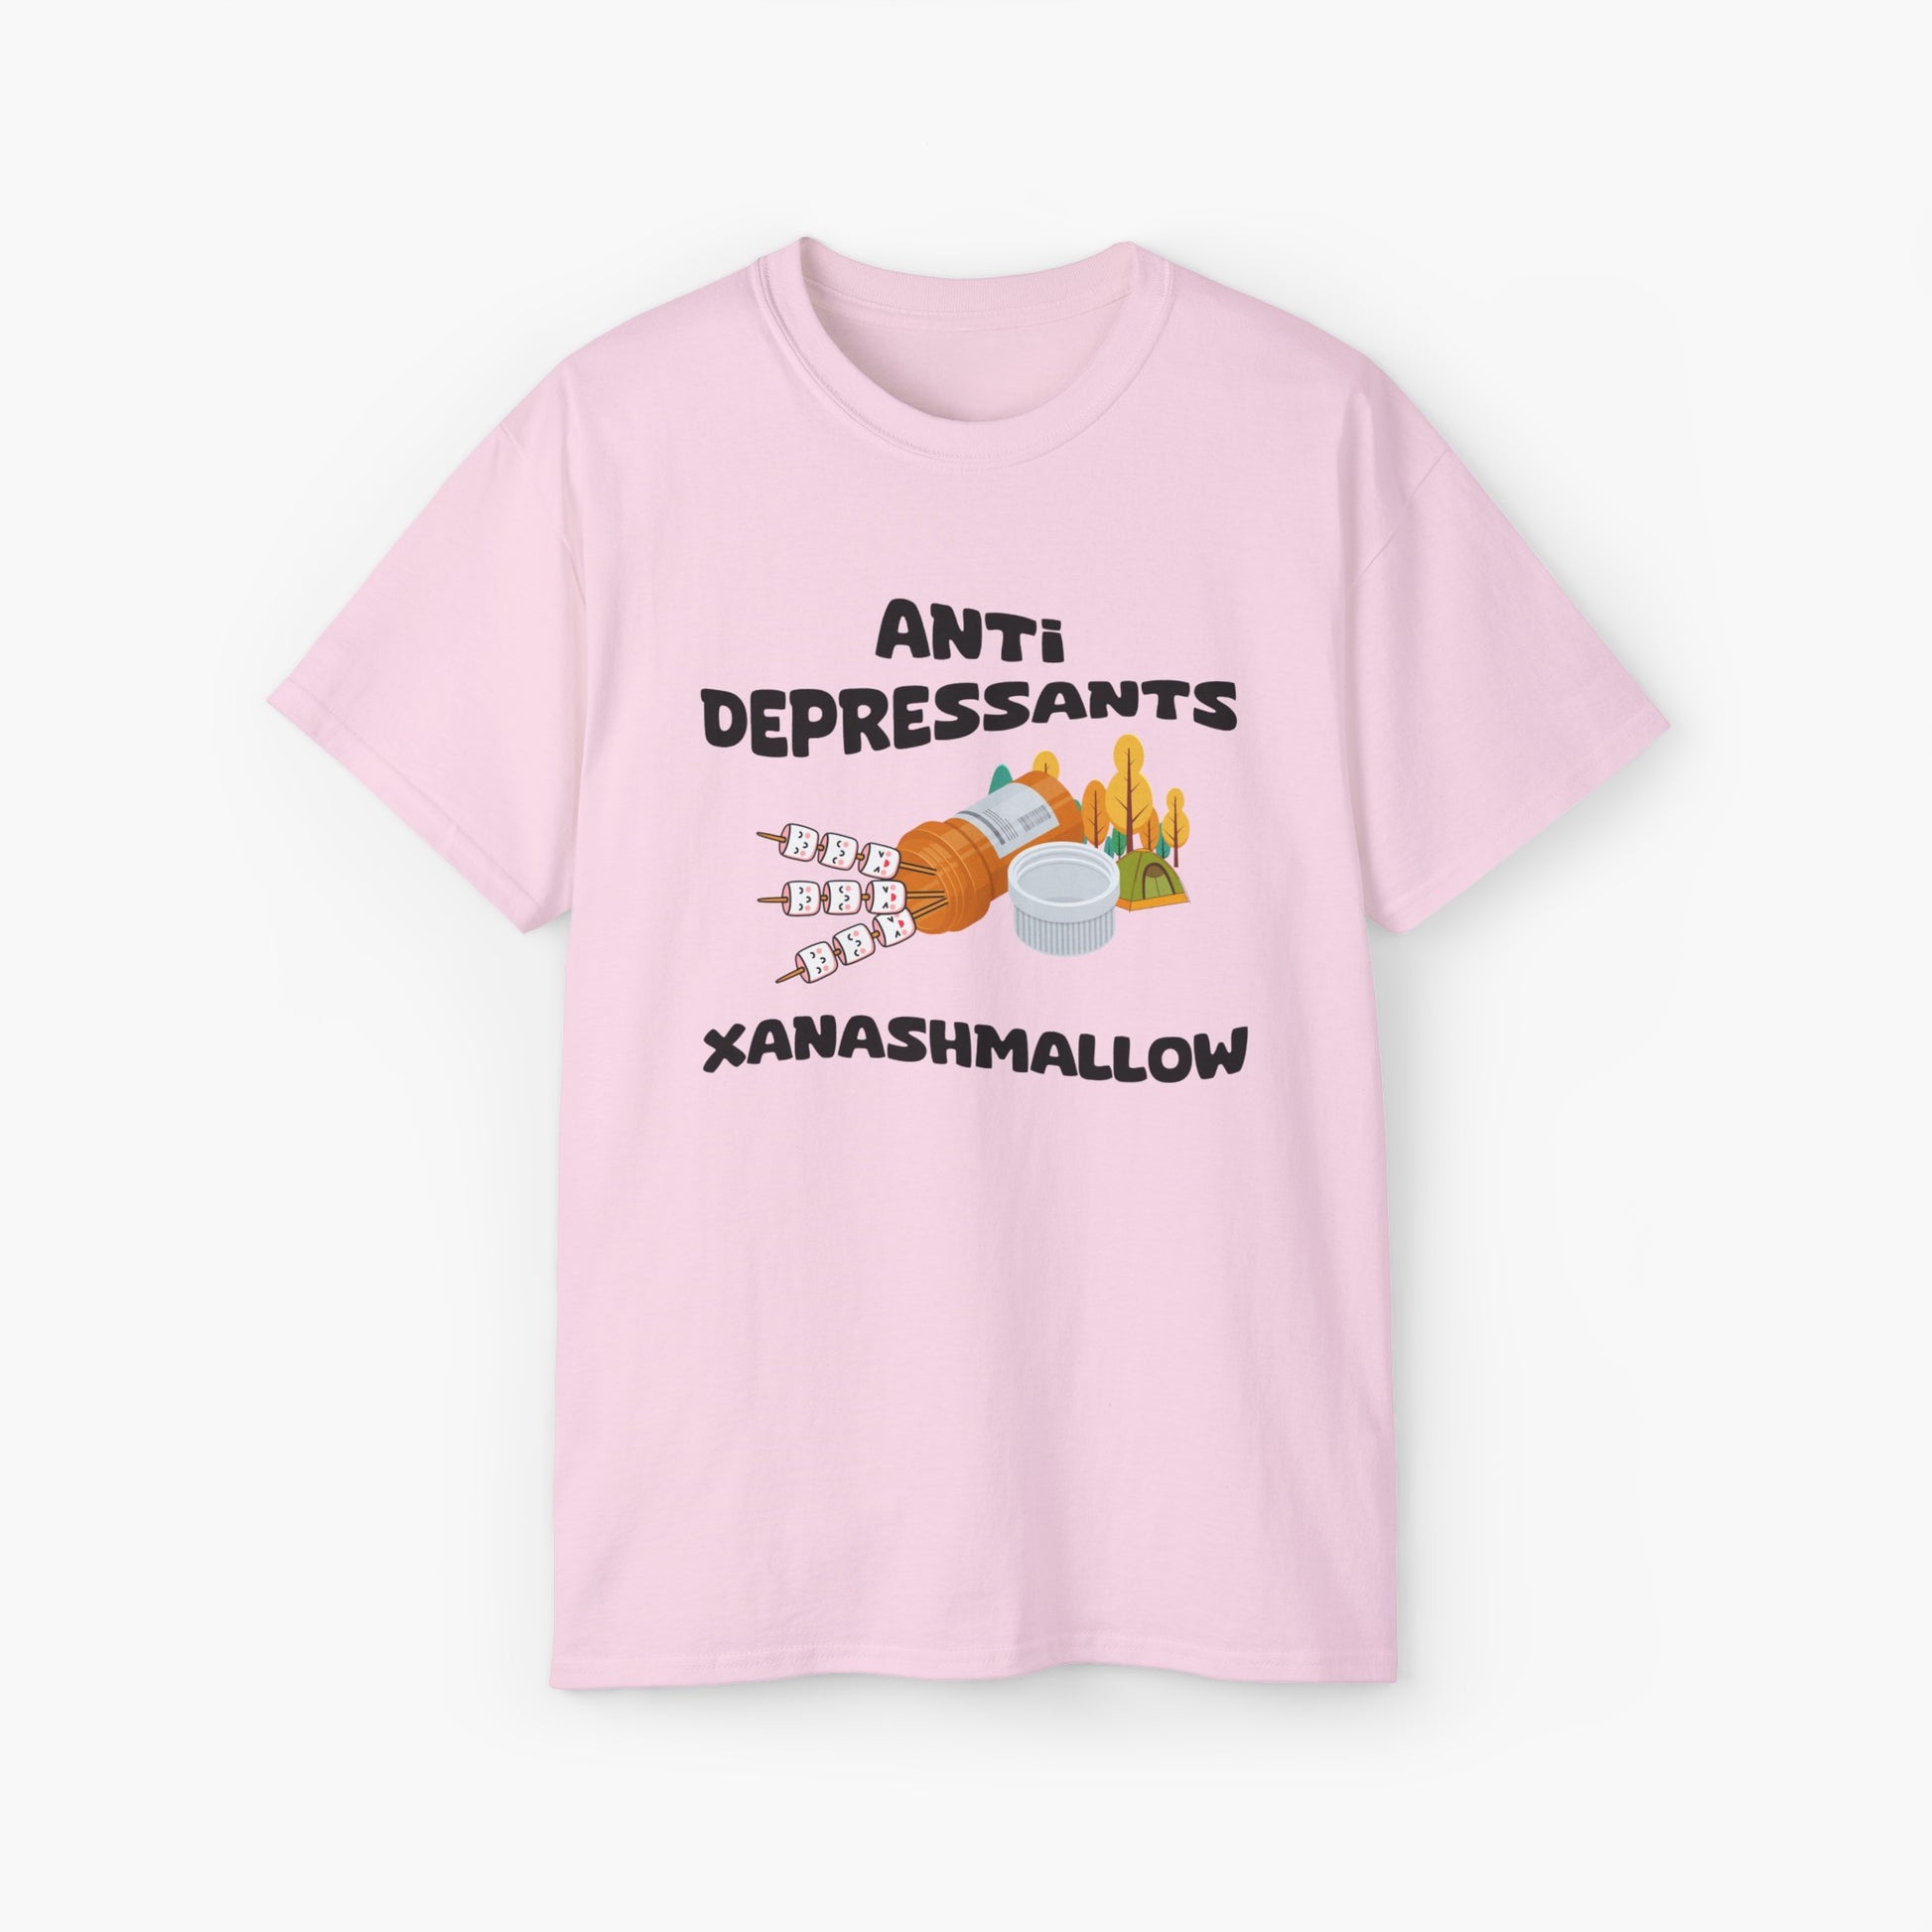 Light pink t-shirt with 'Anti Depressants, Xanashmallow' text, depicting an open remedies box filled with marshmallows, alongside a tent and trees.